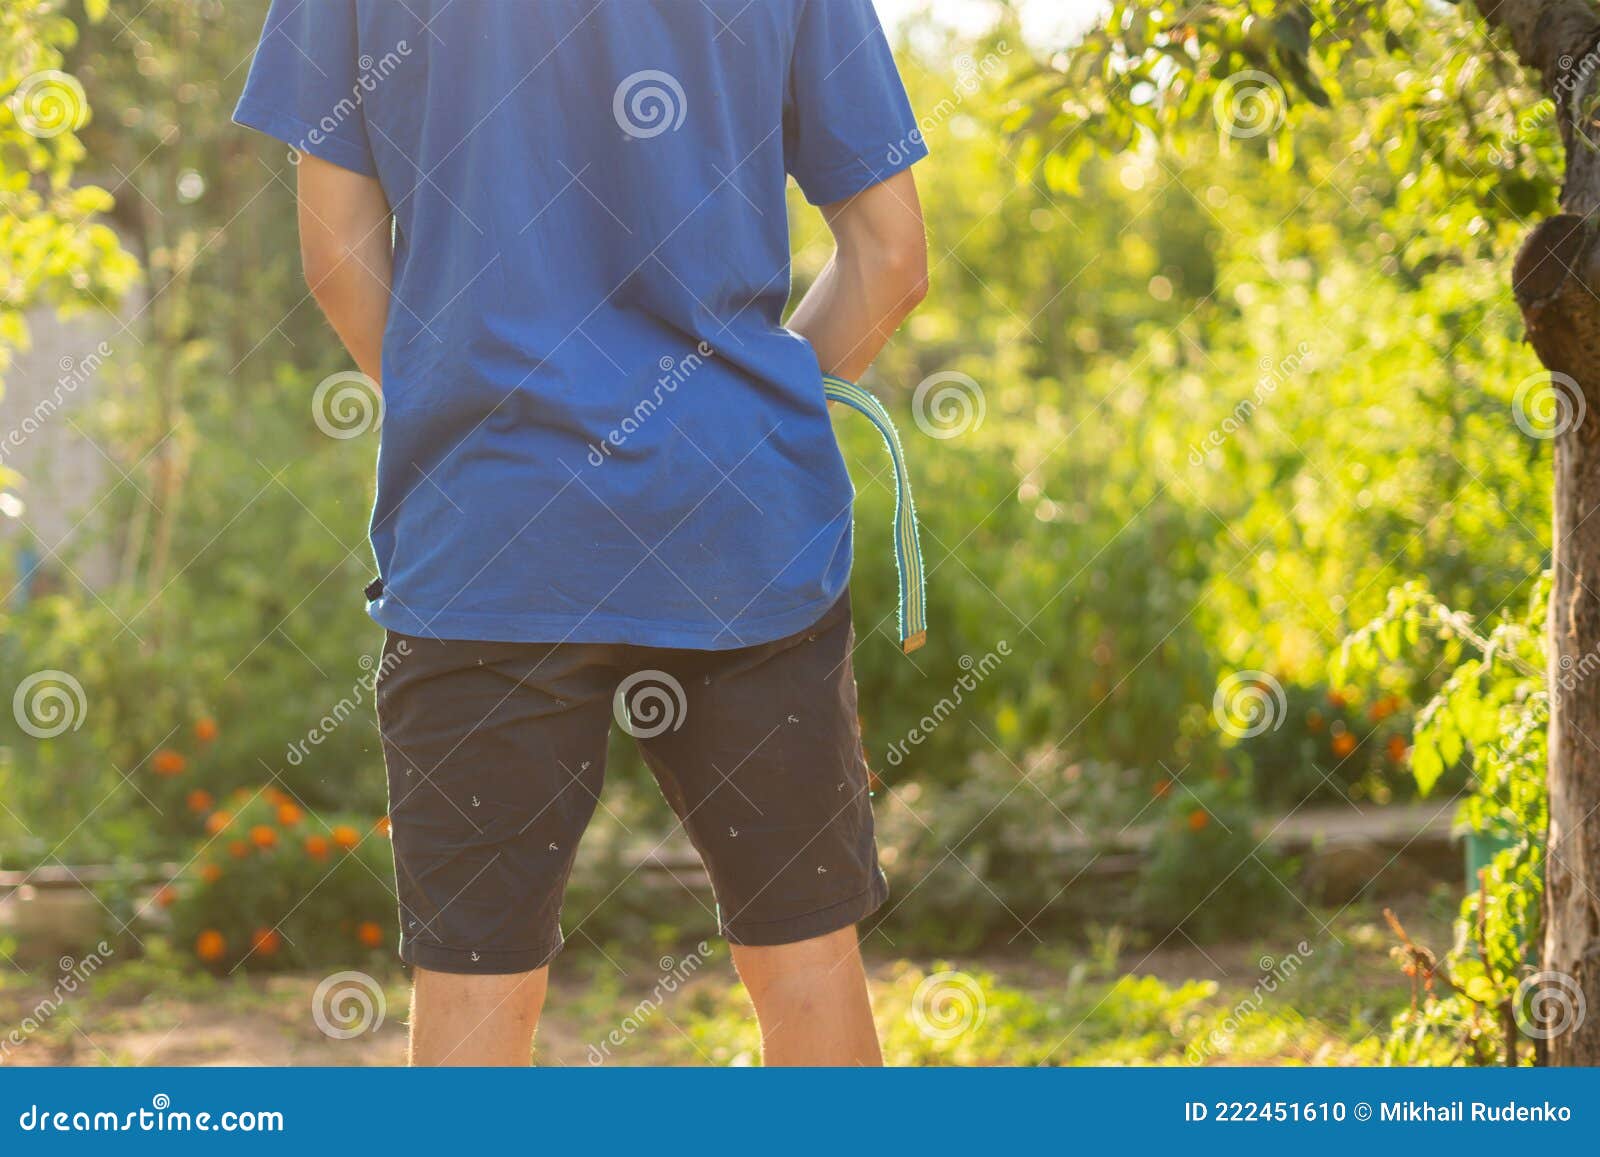 rear view of young person standing outdoor and piss under the trees